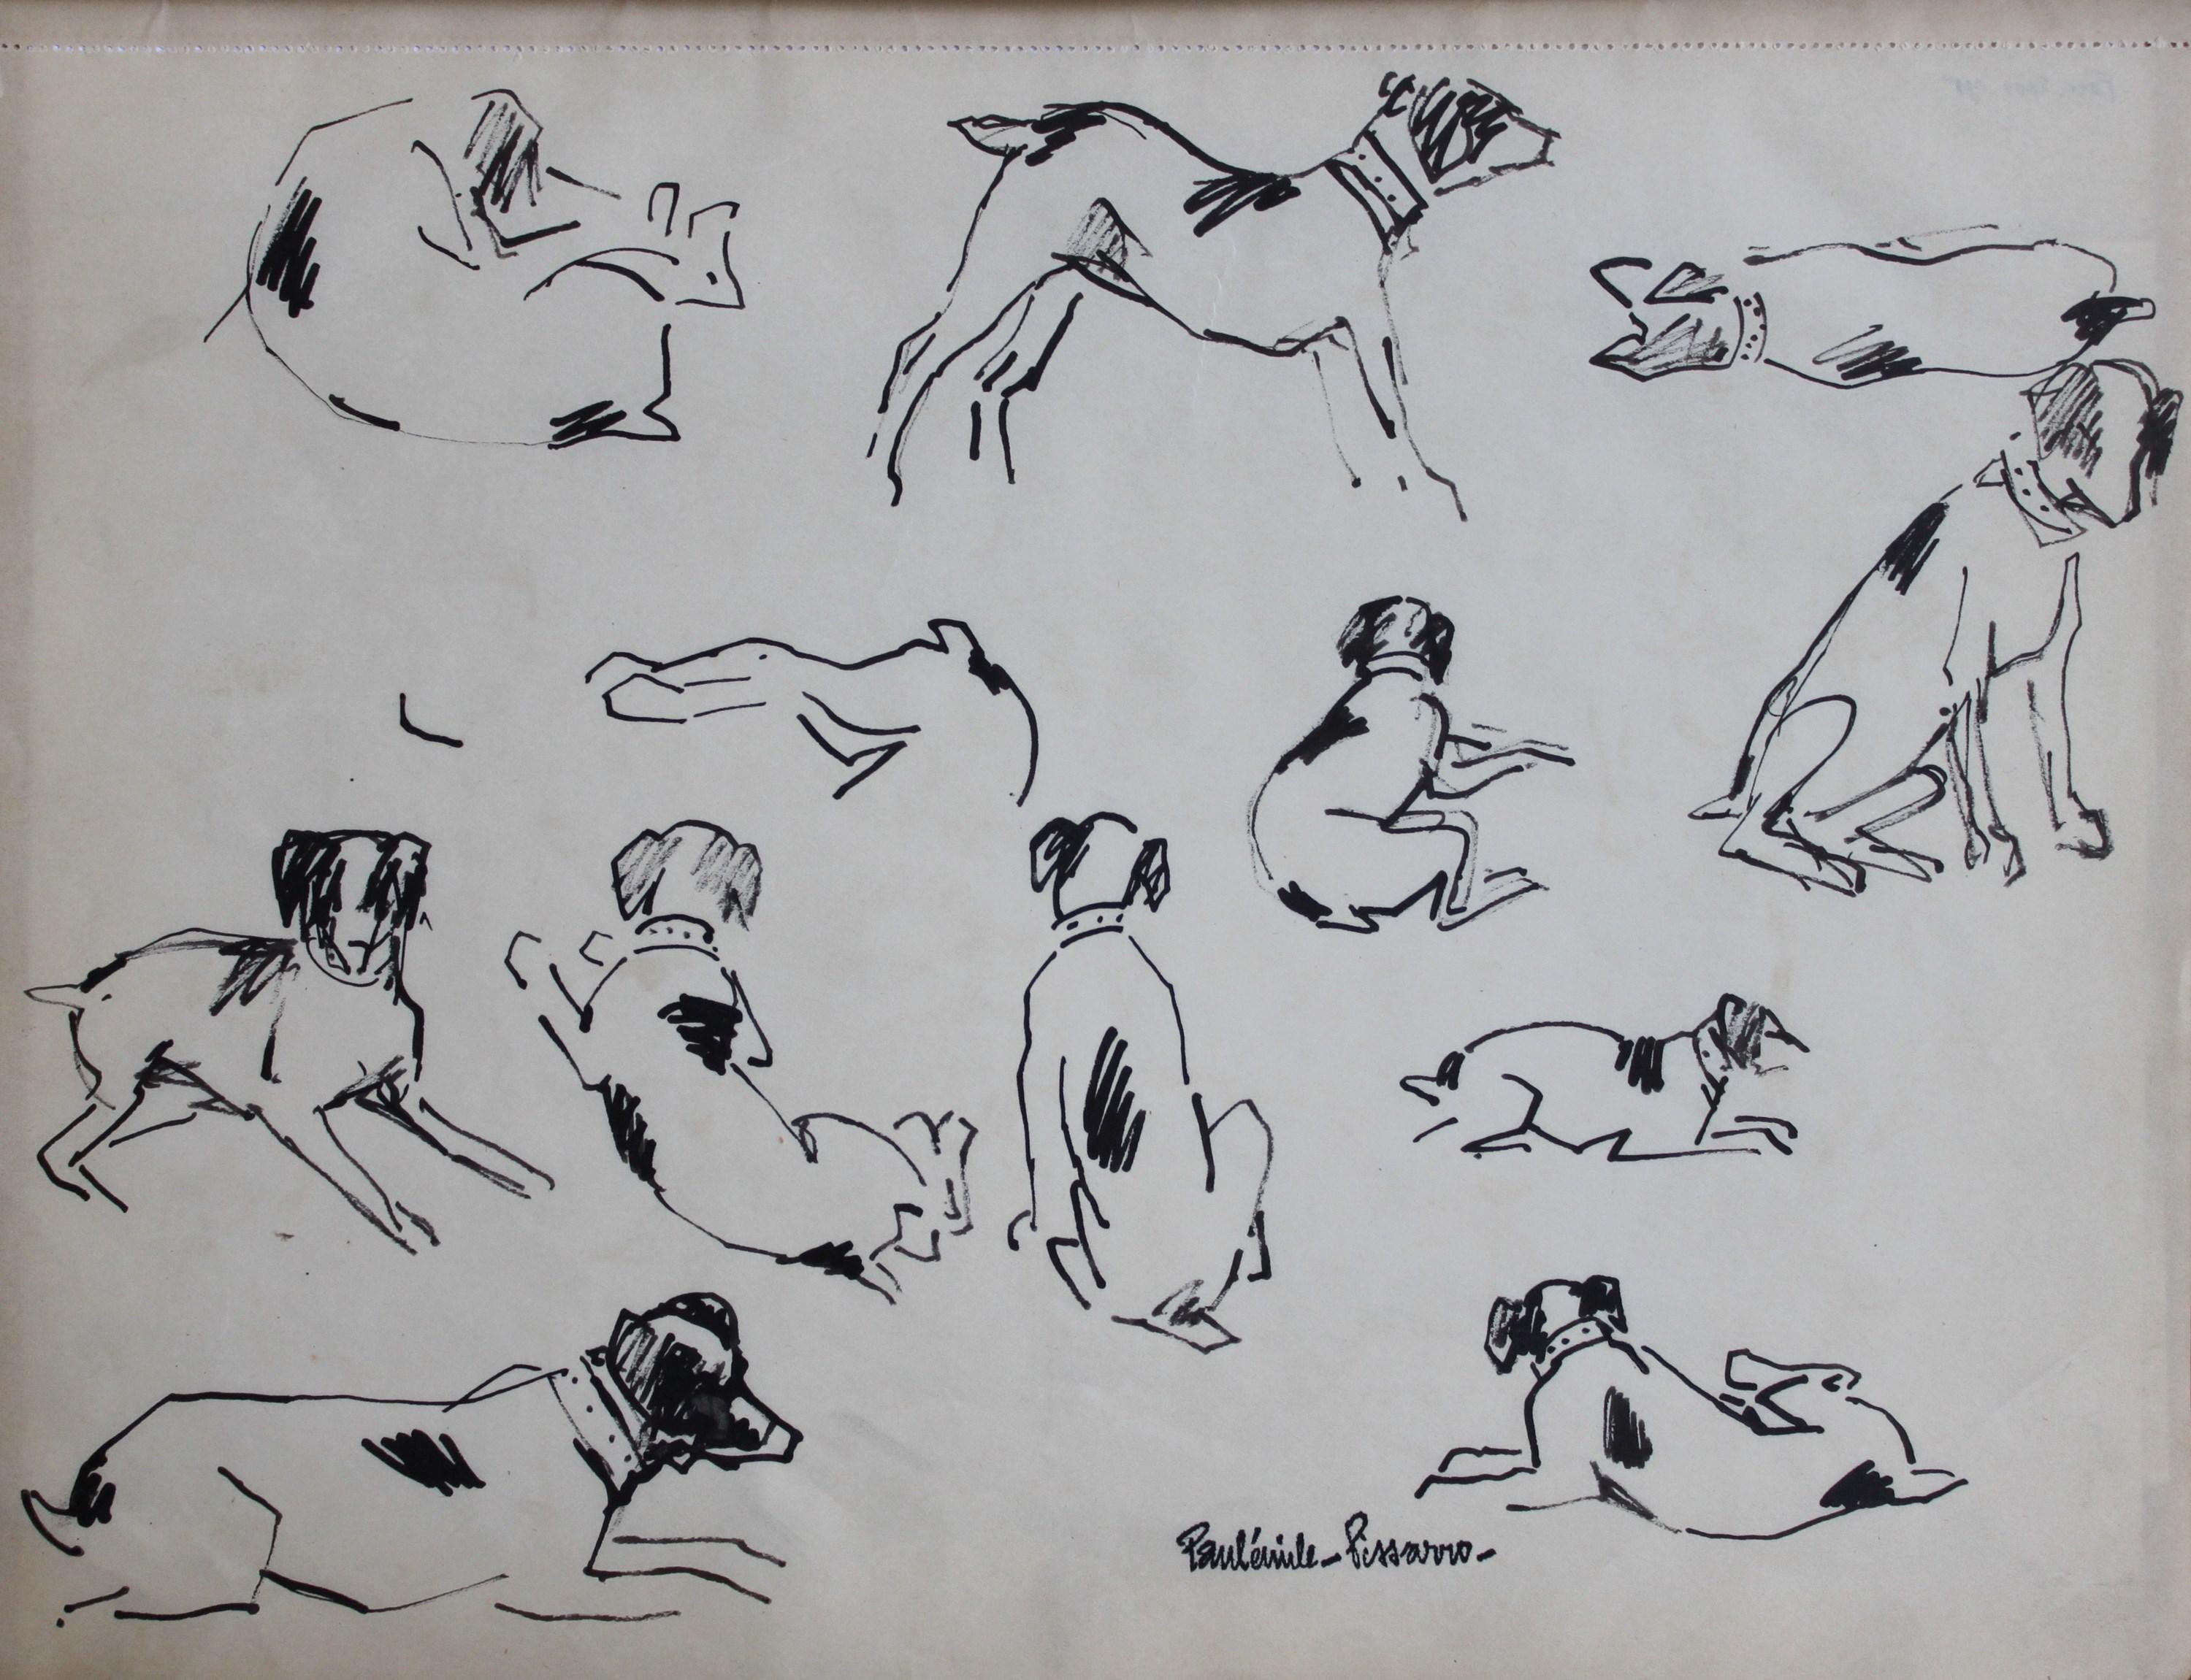 SOLD UNFRAMED 

*UK BUYERS WILL PAY AN ADDITIONAL 20% VAT ON TOP OF THE ABOVE PRICE

Etude de Chiens by Paulémile Pissarro (1884 - 1972)
Ink on paper
23 x 31 cm (9 x 12 ¹/₄ inches)
Signed with estate stamp lower left

This work is accompanied by a